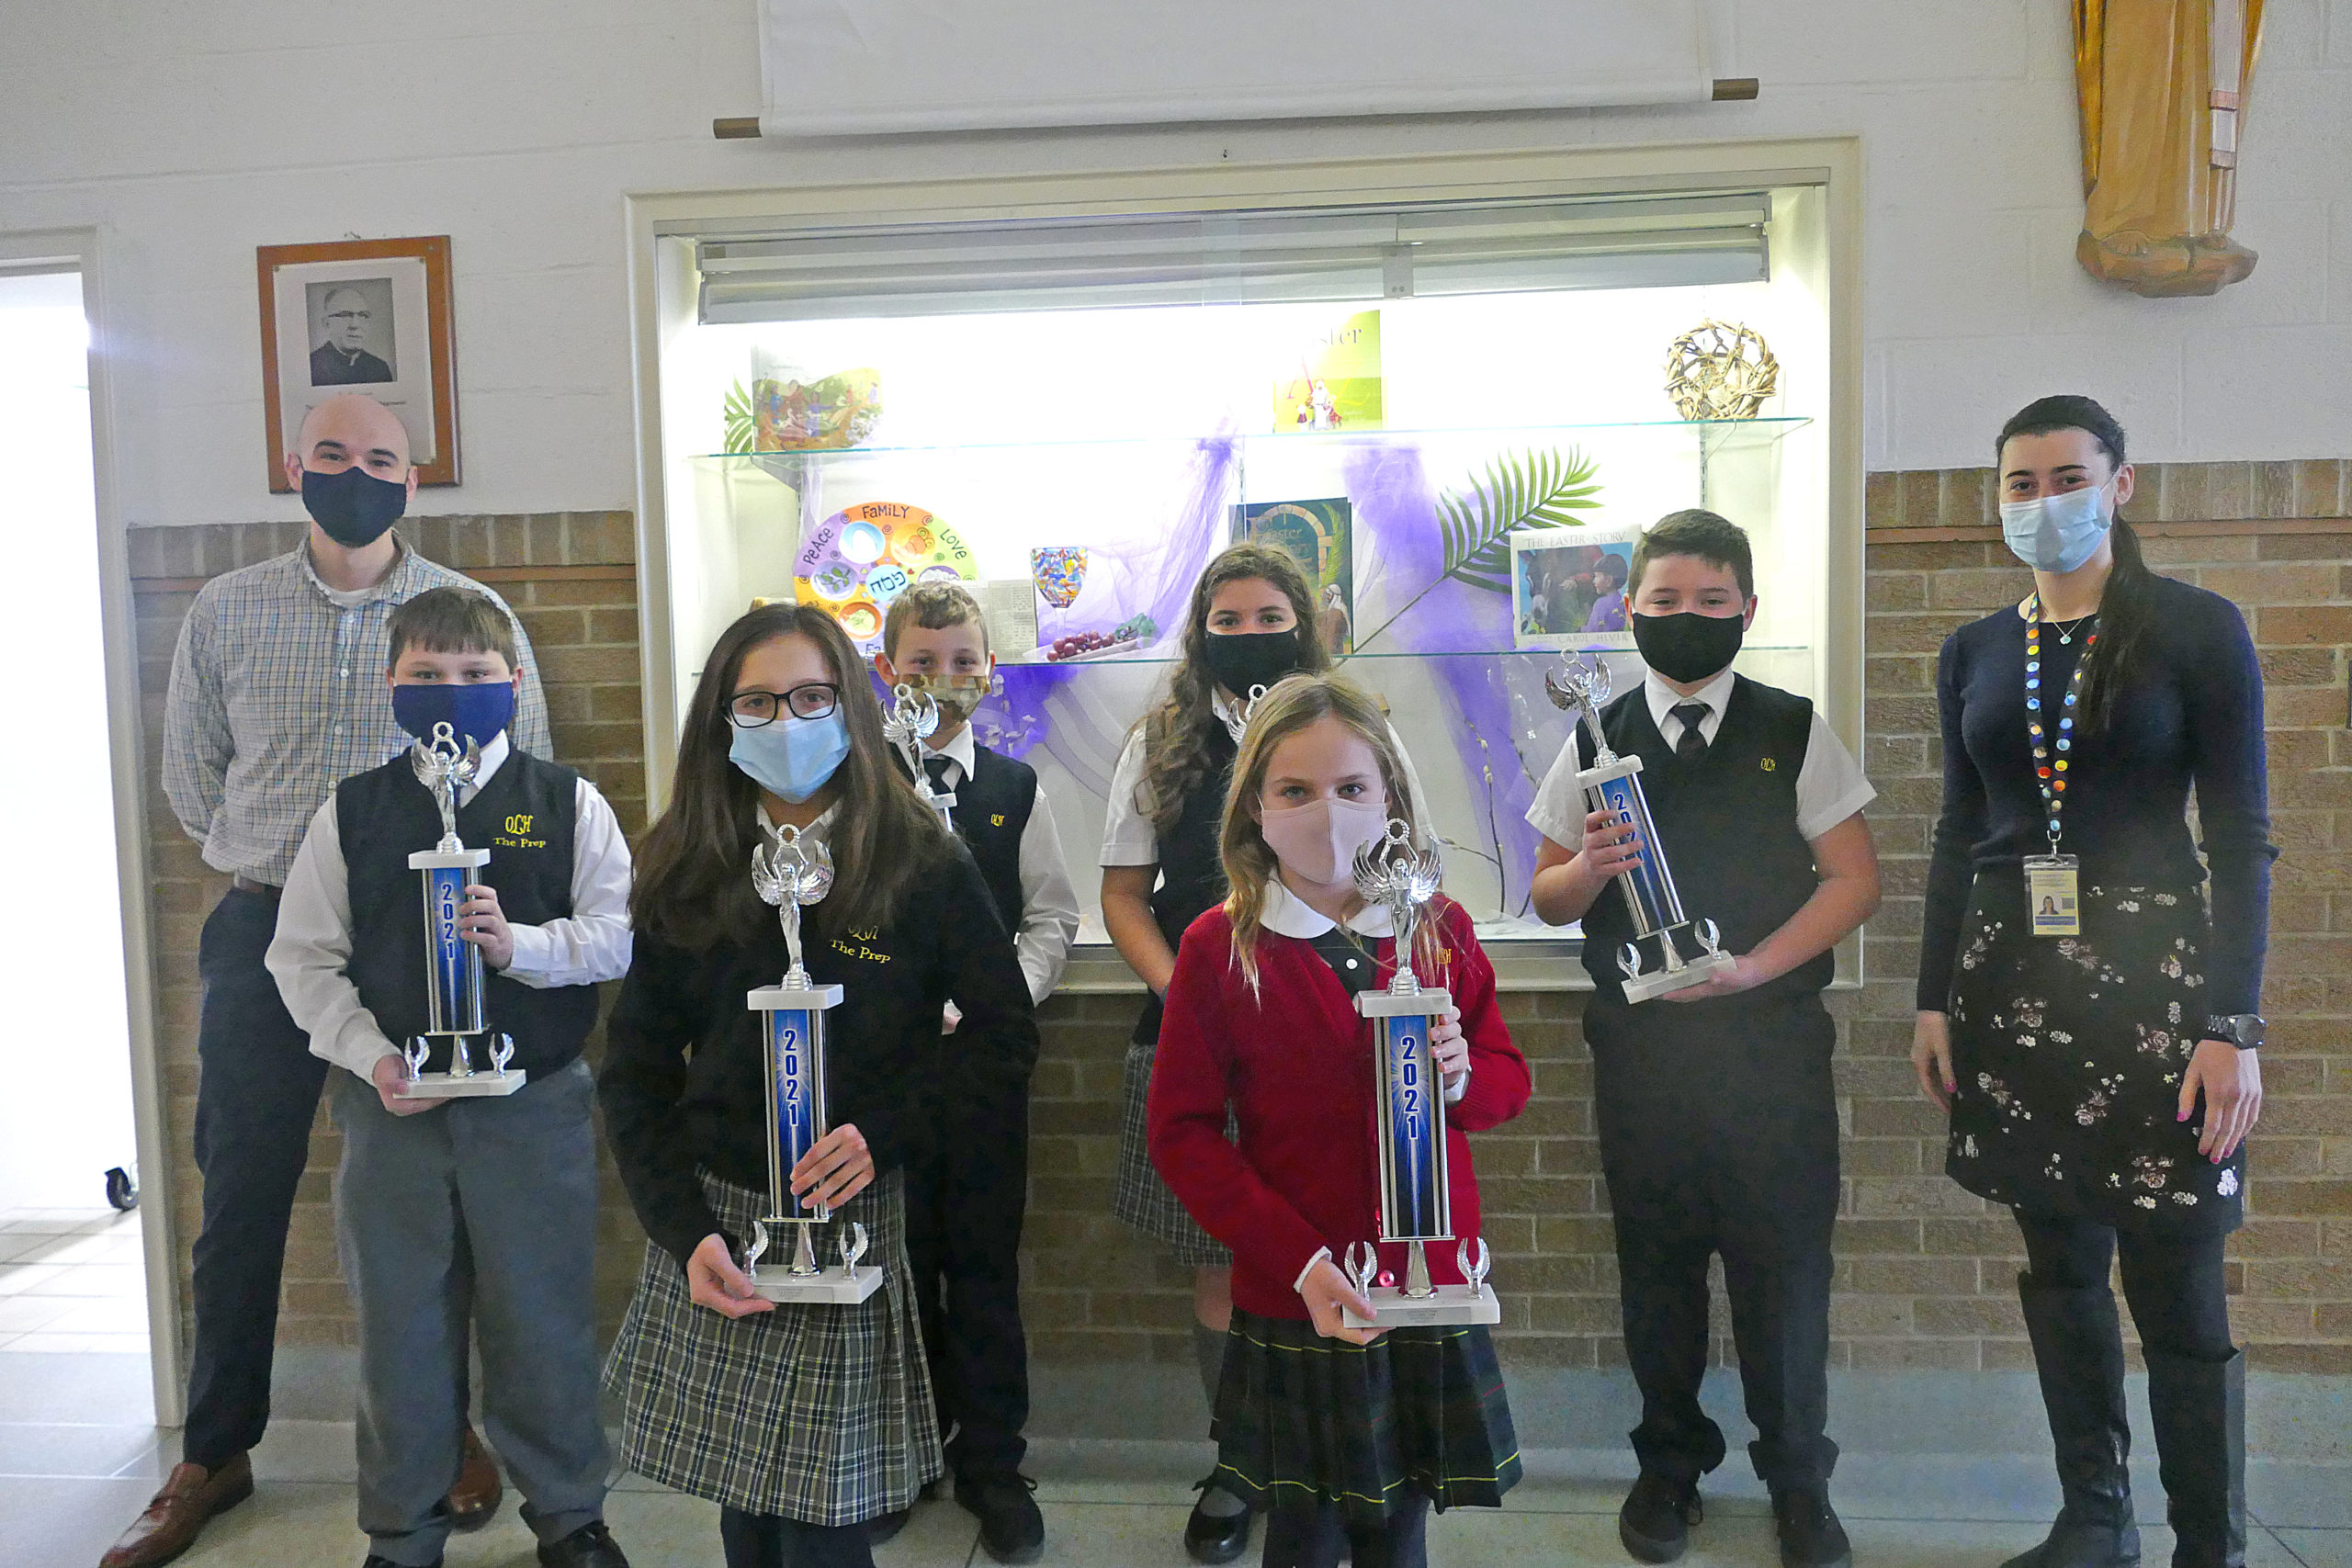 The grade level winners of the Science Shark Tank at OLH are, pictured with their teachers, Logan Robinson and Amanda Burriesci, Sofia Patrone, Bianca Alvarado, Conner McVeigh, Steven Kellis, Joseph Martin and Addison Cinelli.  COURTESY OUR LADY OF THE HAMPTONS